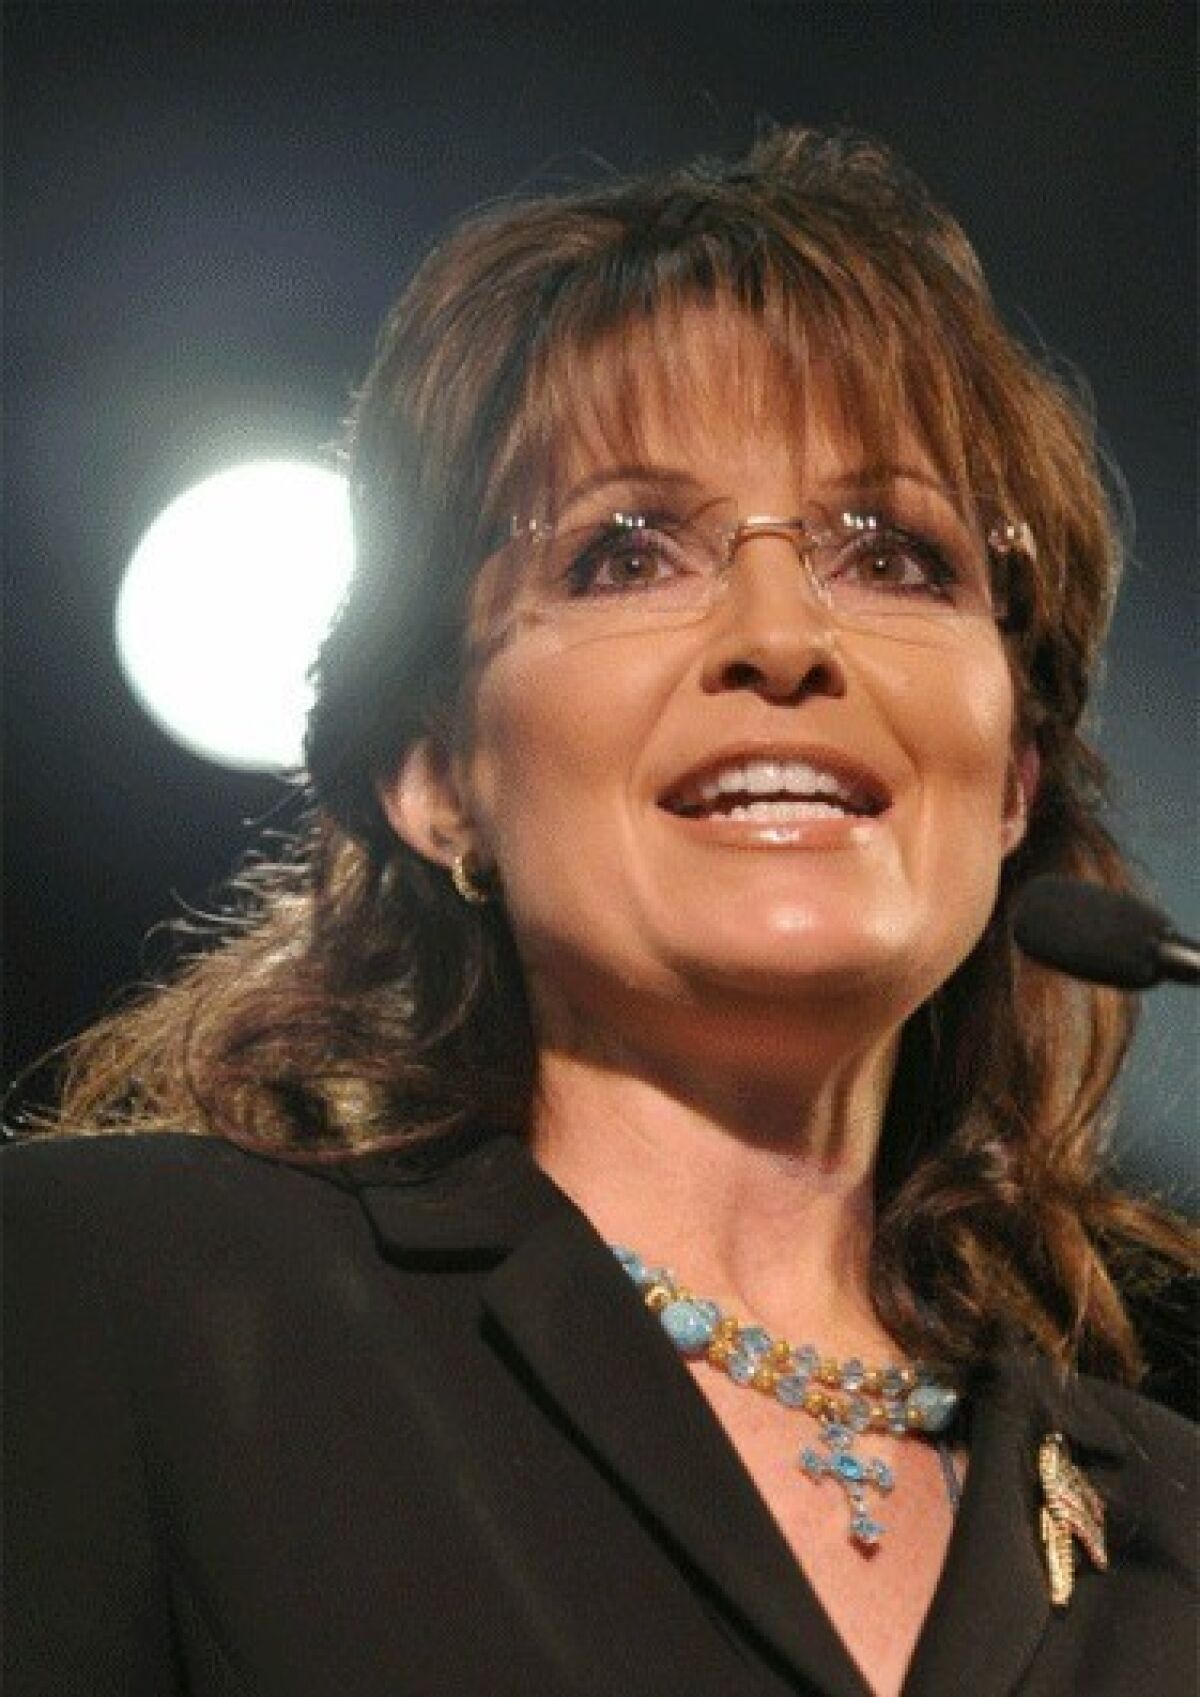 Sarah Palin, seen into 2010, "made it to the national stage in the first place because someone made the gross miscalculation that, as a woman, she was somehow interchangeable with Hillary Rodham Clinton and would inherit (or co-opt) Clinton's voters after the 2008 primaries," writes Meghan Daum.